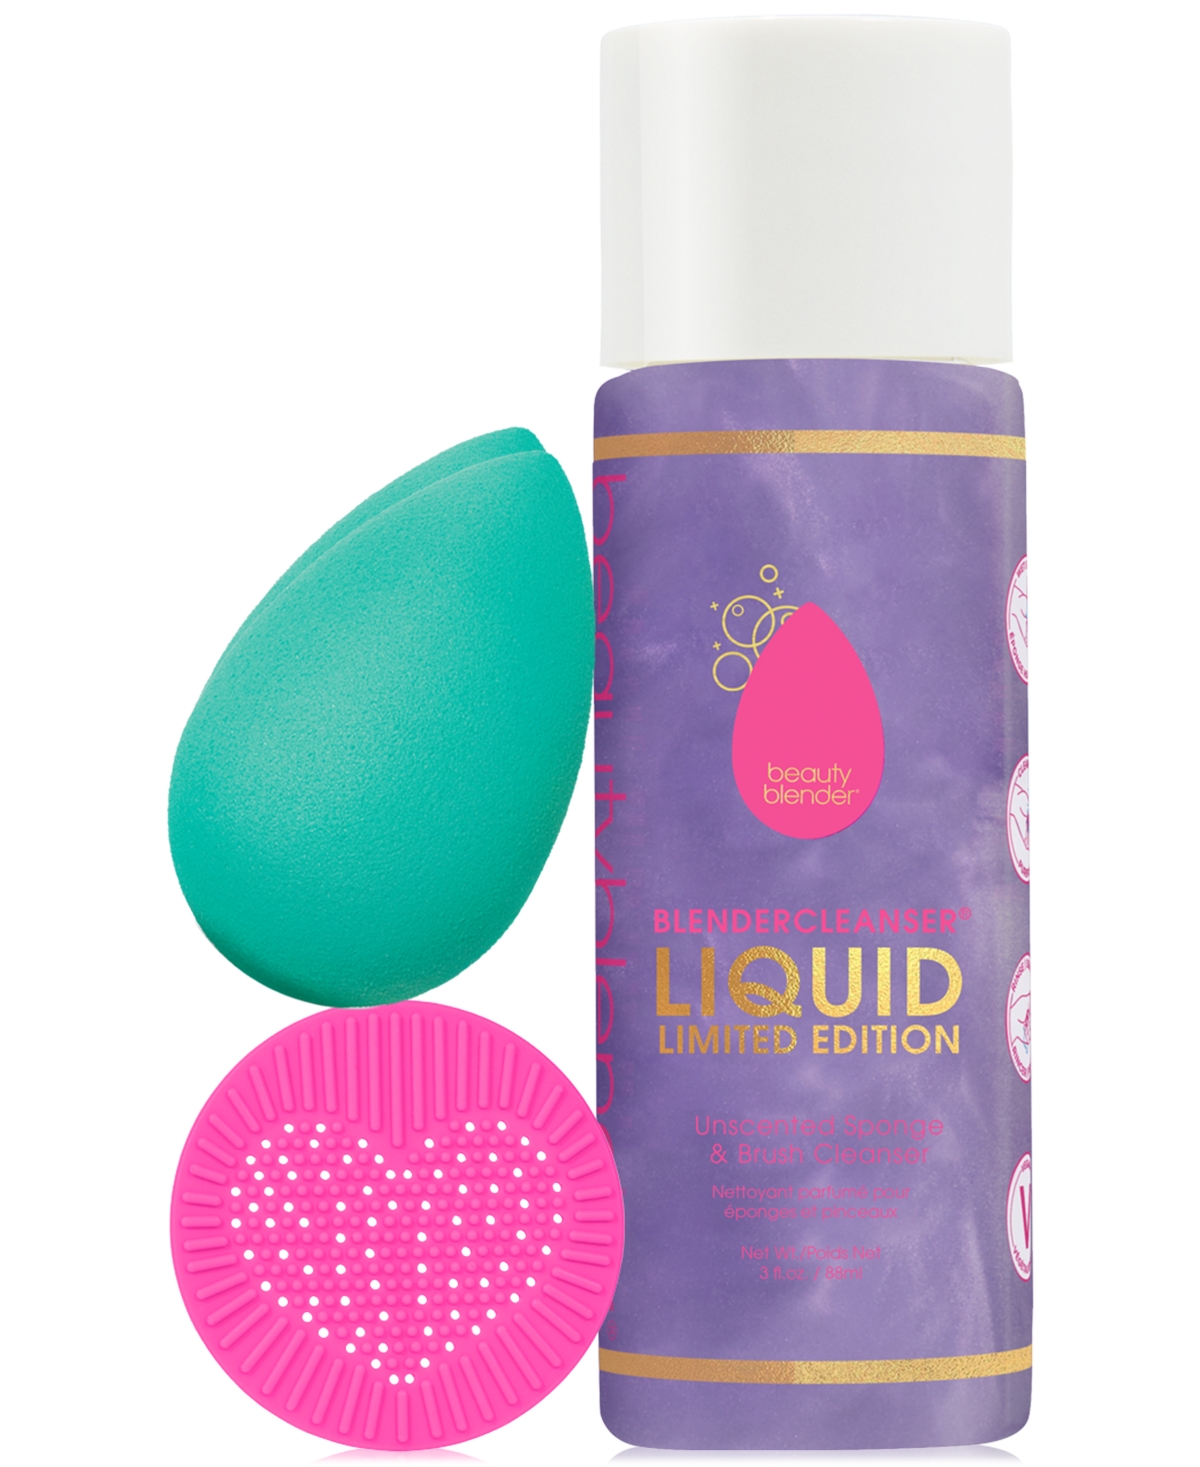 3-Pc BeautyBlender Blend Baby Blend Essentials Set (Chill Makeup Sponge, 3-Oz Brush Cleanser, Silicone Scrub Mat) $12.50 + Free Store Pickup at Macy's or FS on $25+